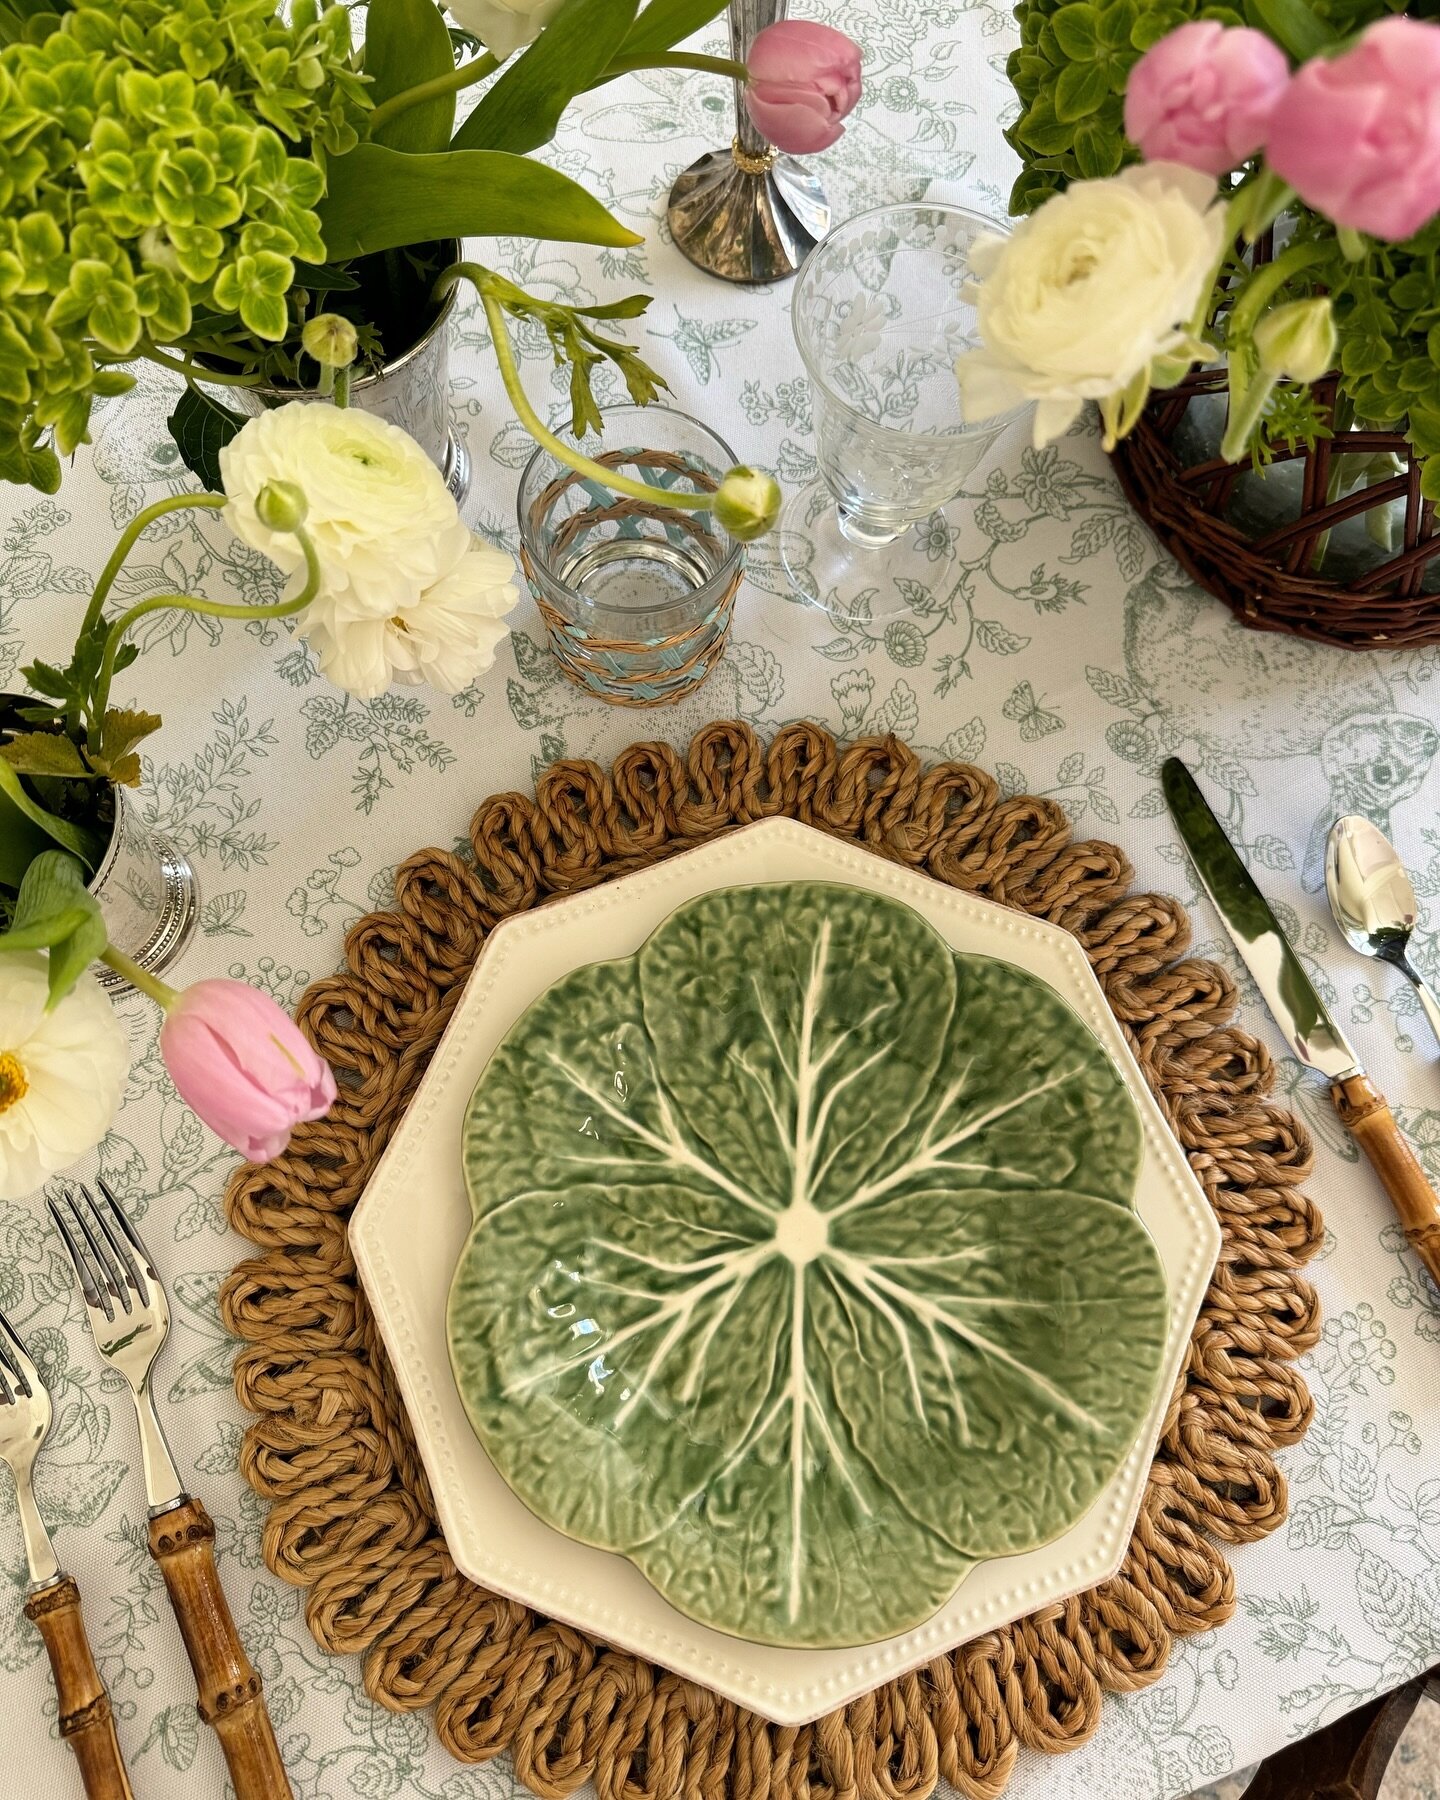 Happy Easter 🐣🌷 looking forward to celebrating this special day with friends and family!

#spring #springstyle #springtable #easterweekend #eastertable #interiordesigner #atlantadesigner